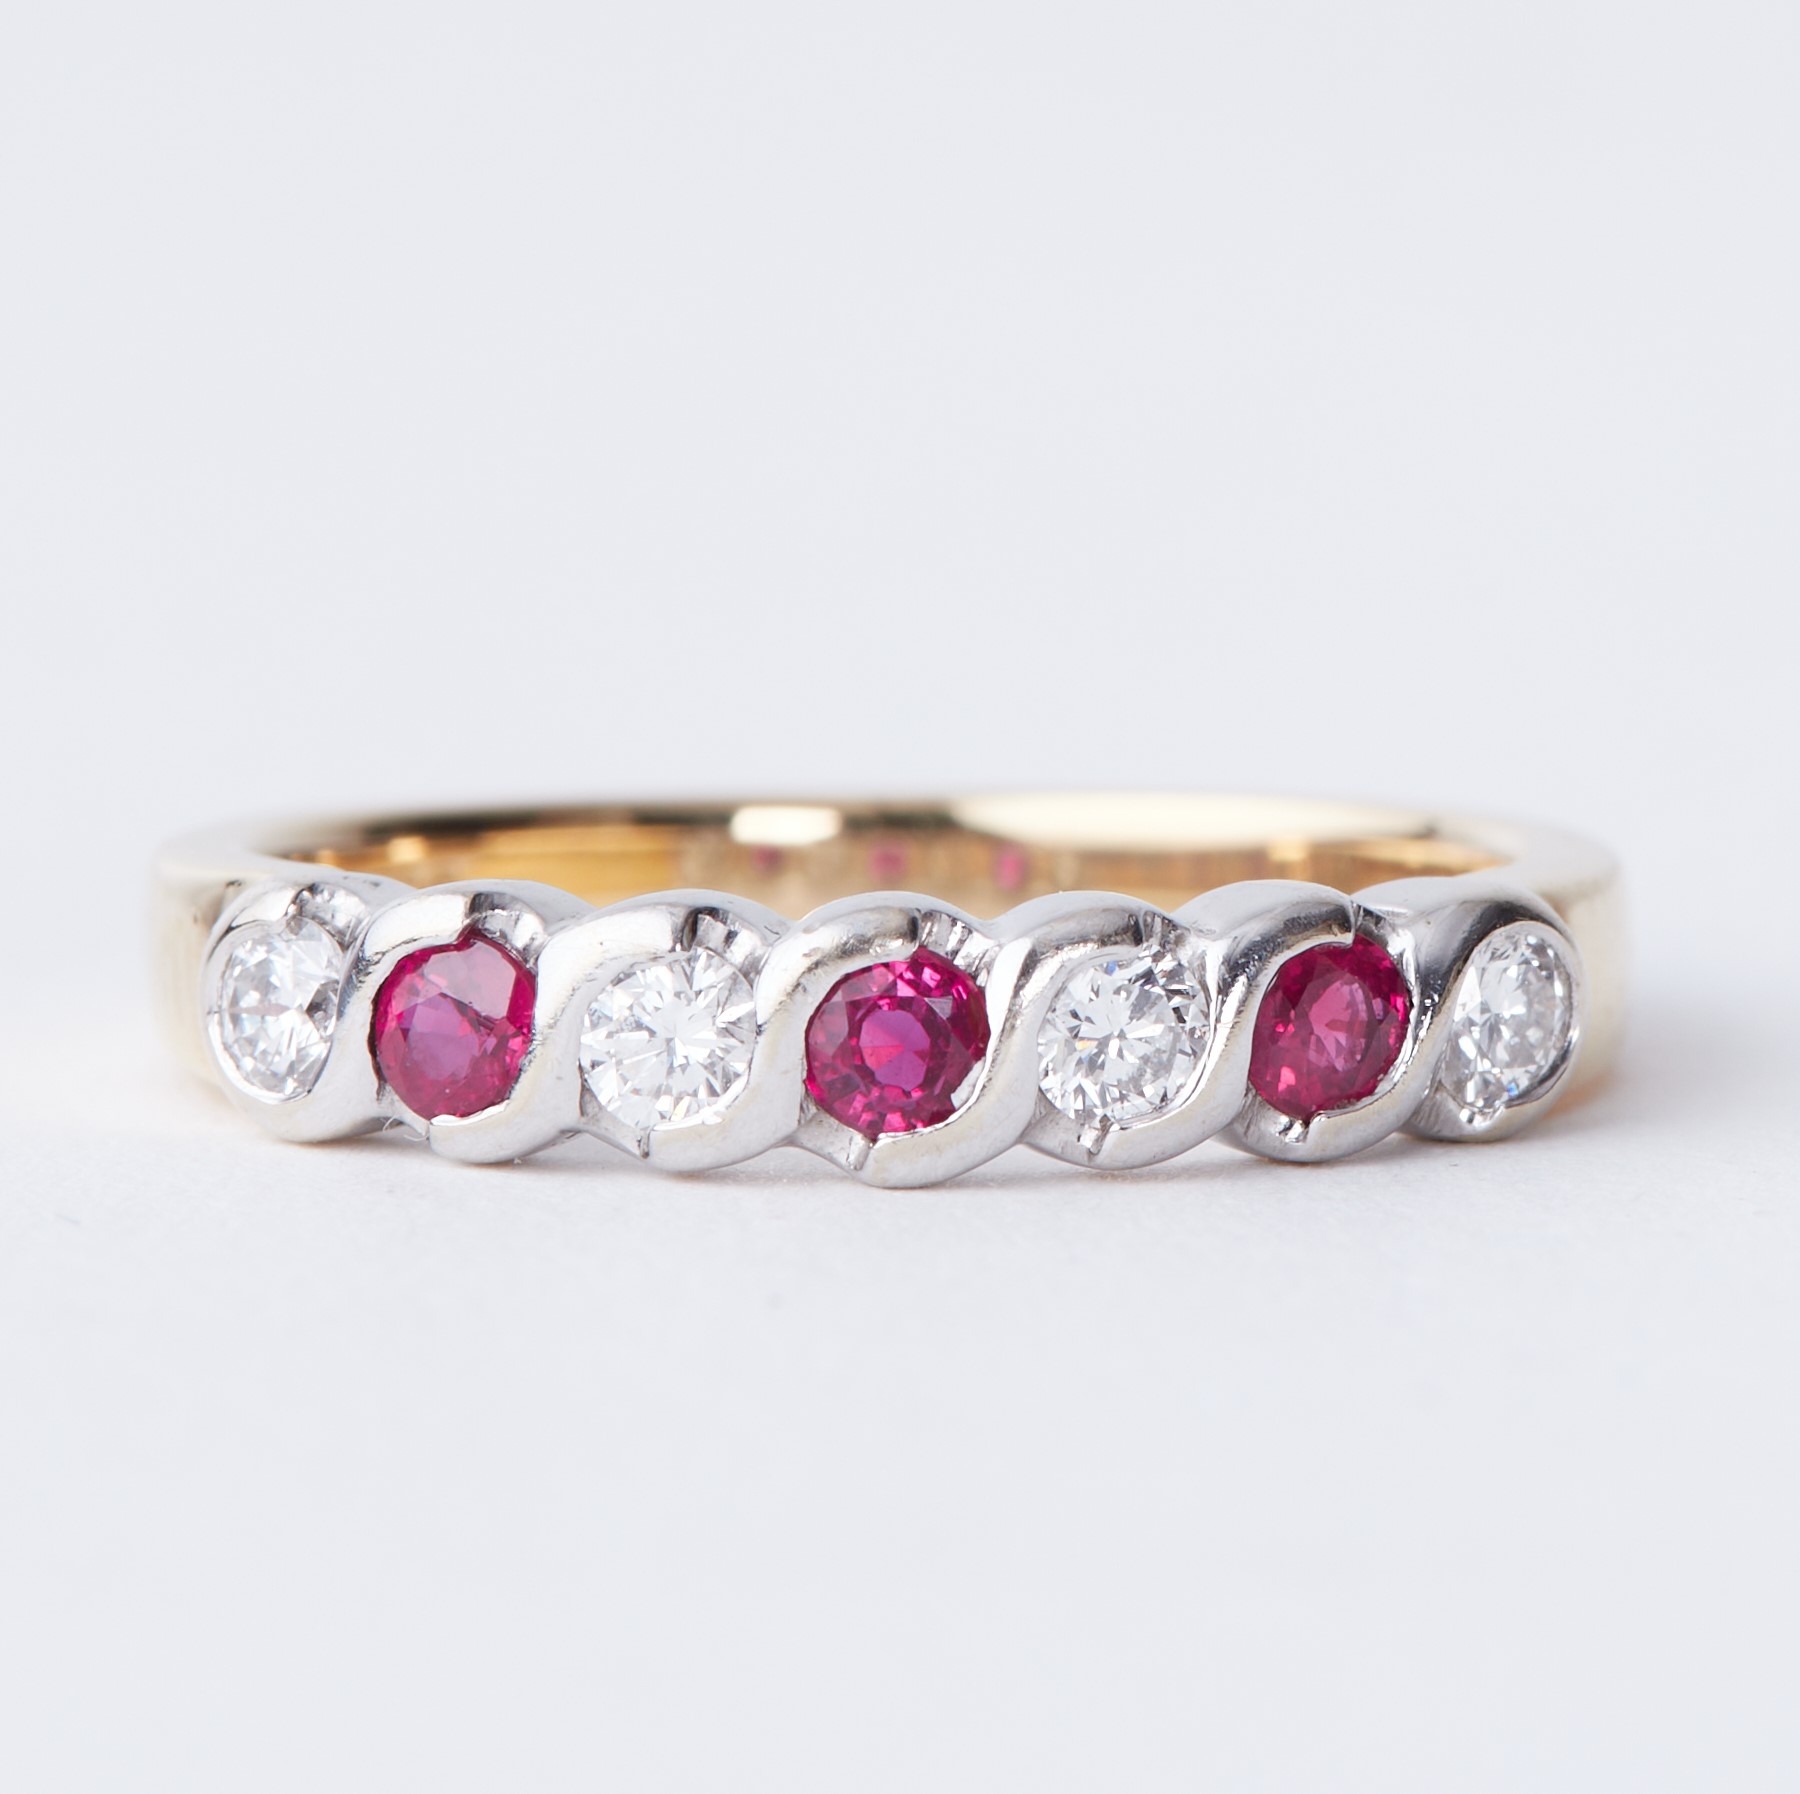 An 18ct yellow & white gold half eternity style ring set with diamonds and rubies